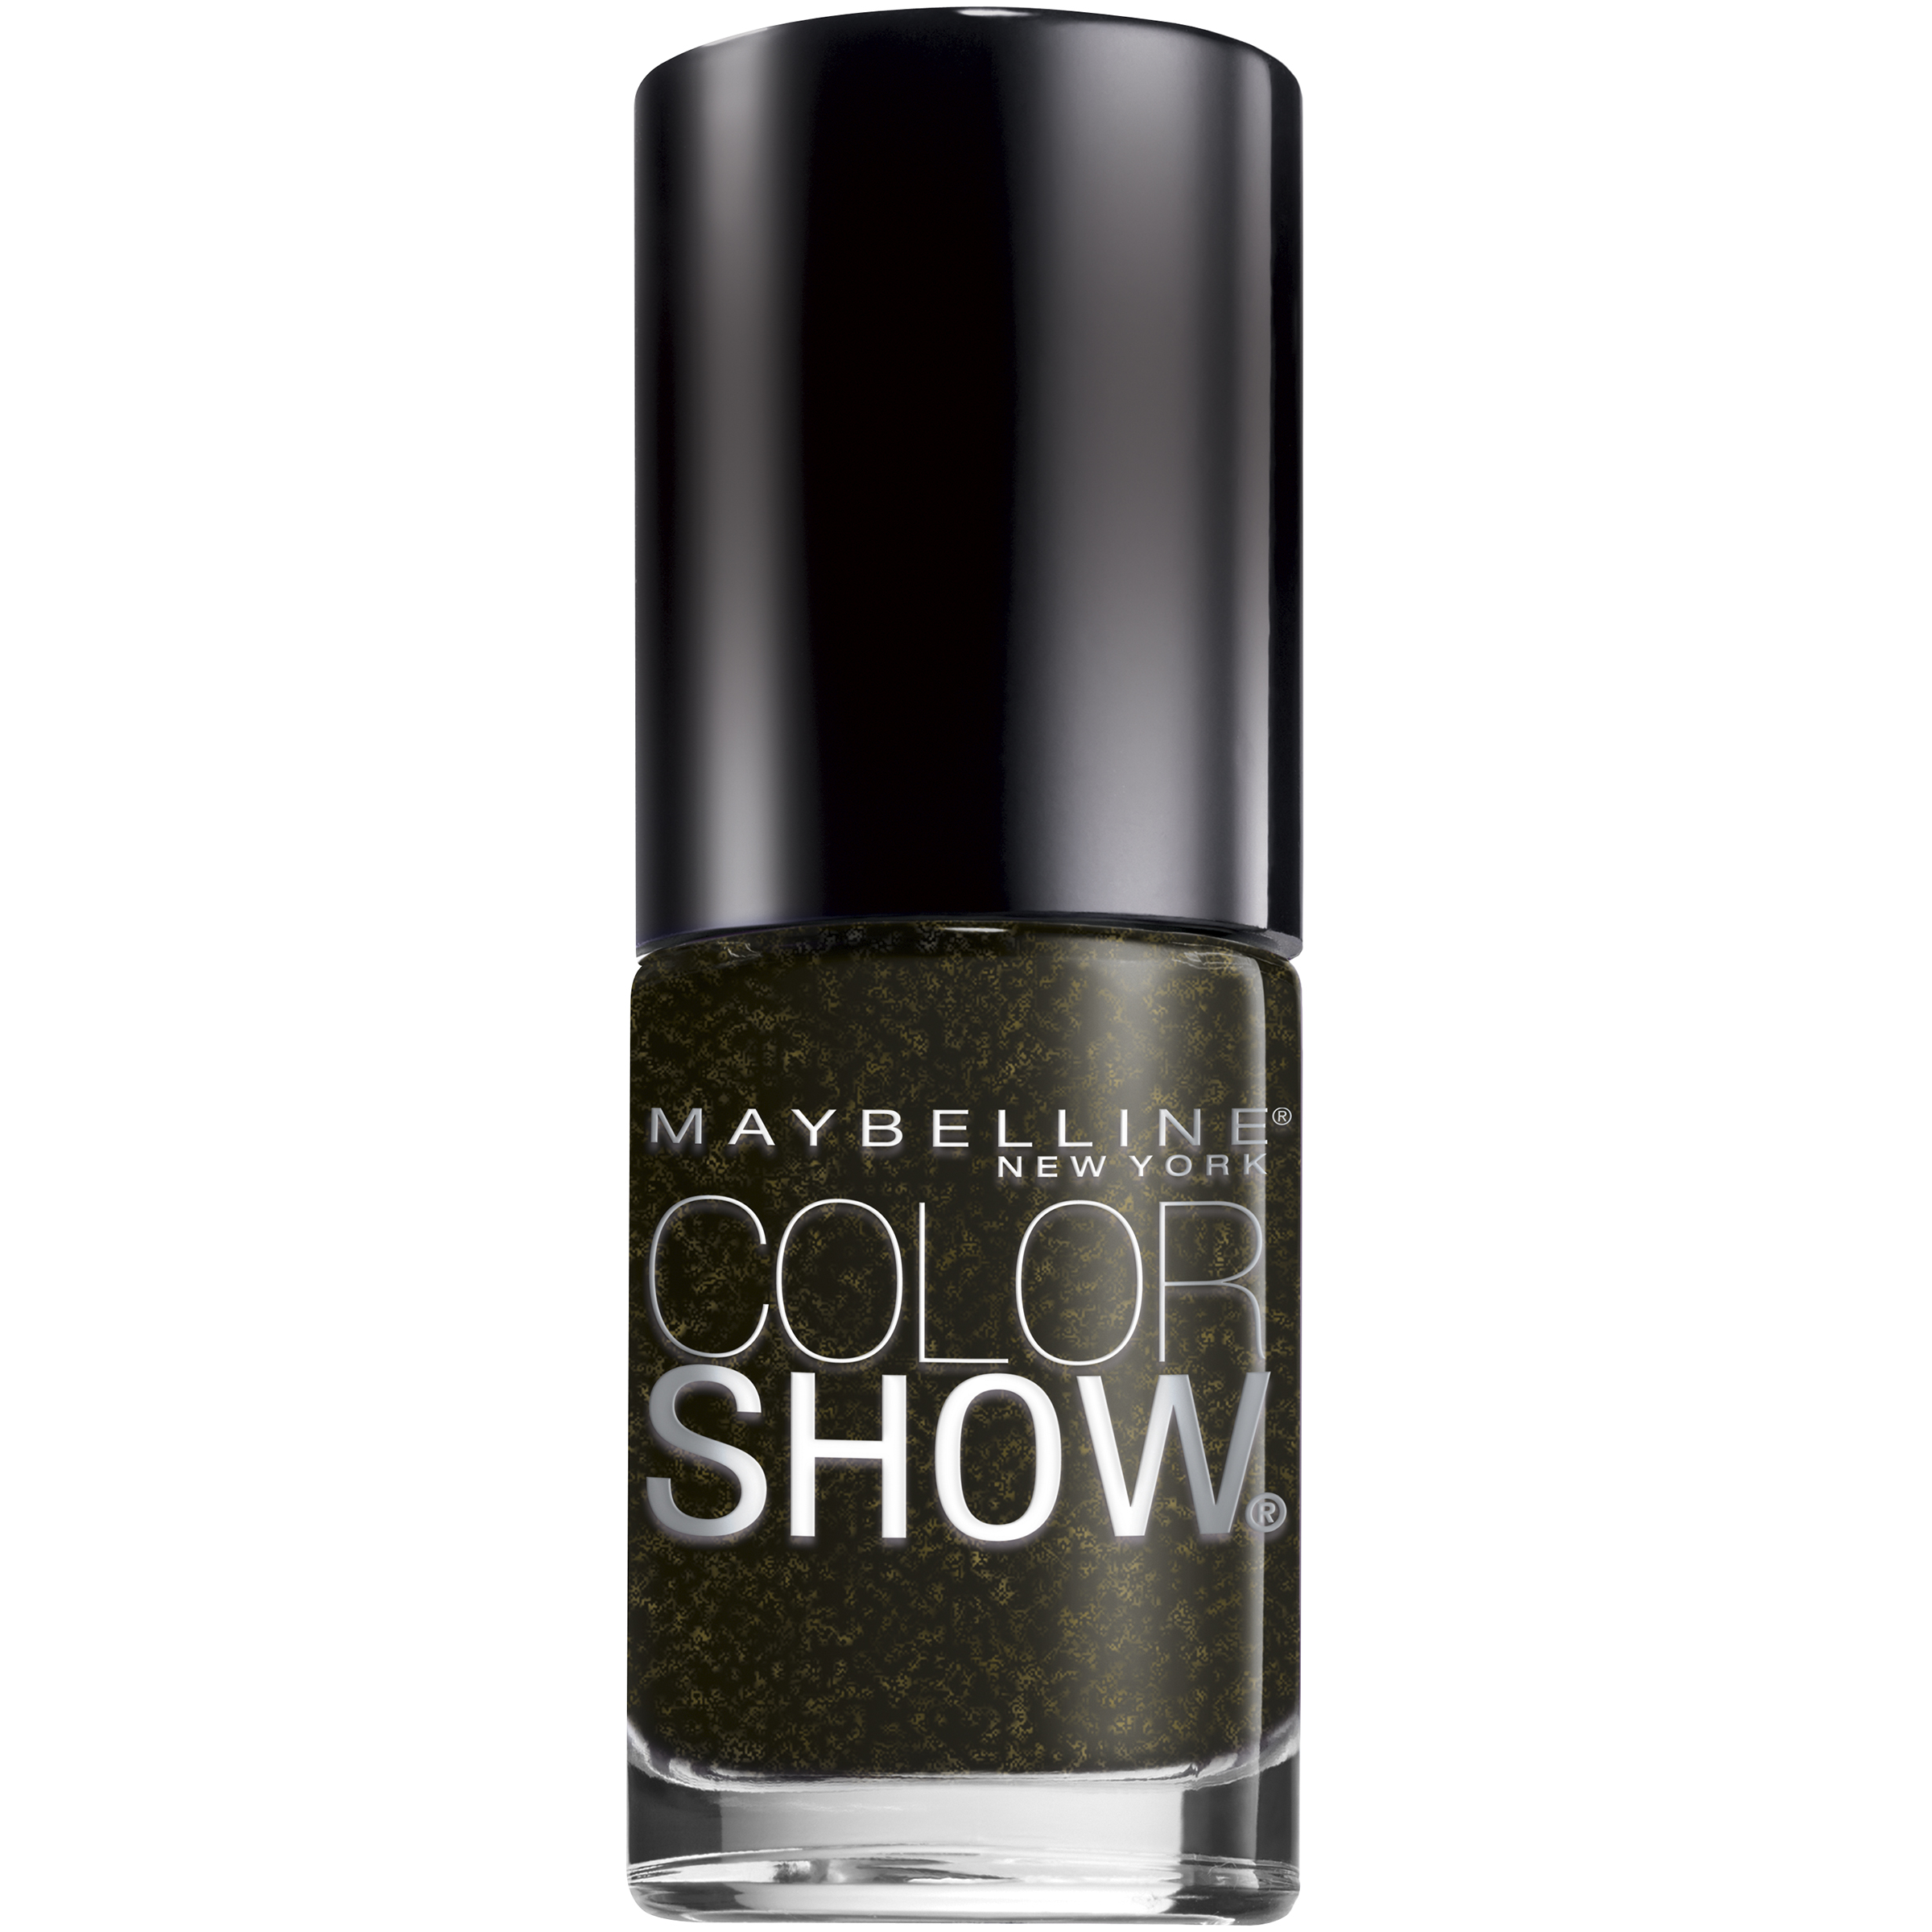 Maybelline New York Color Show Nail Color - Twilight Rays, 0.23 fl oz